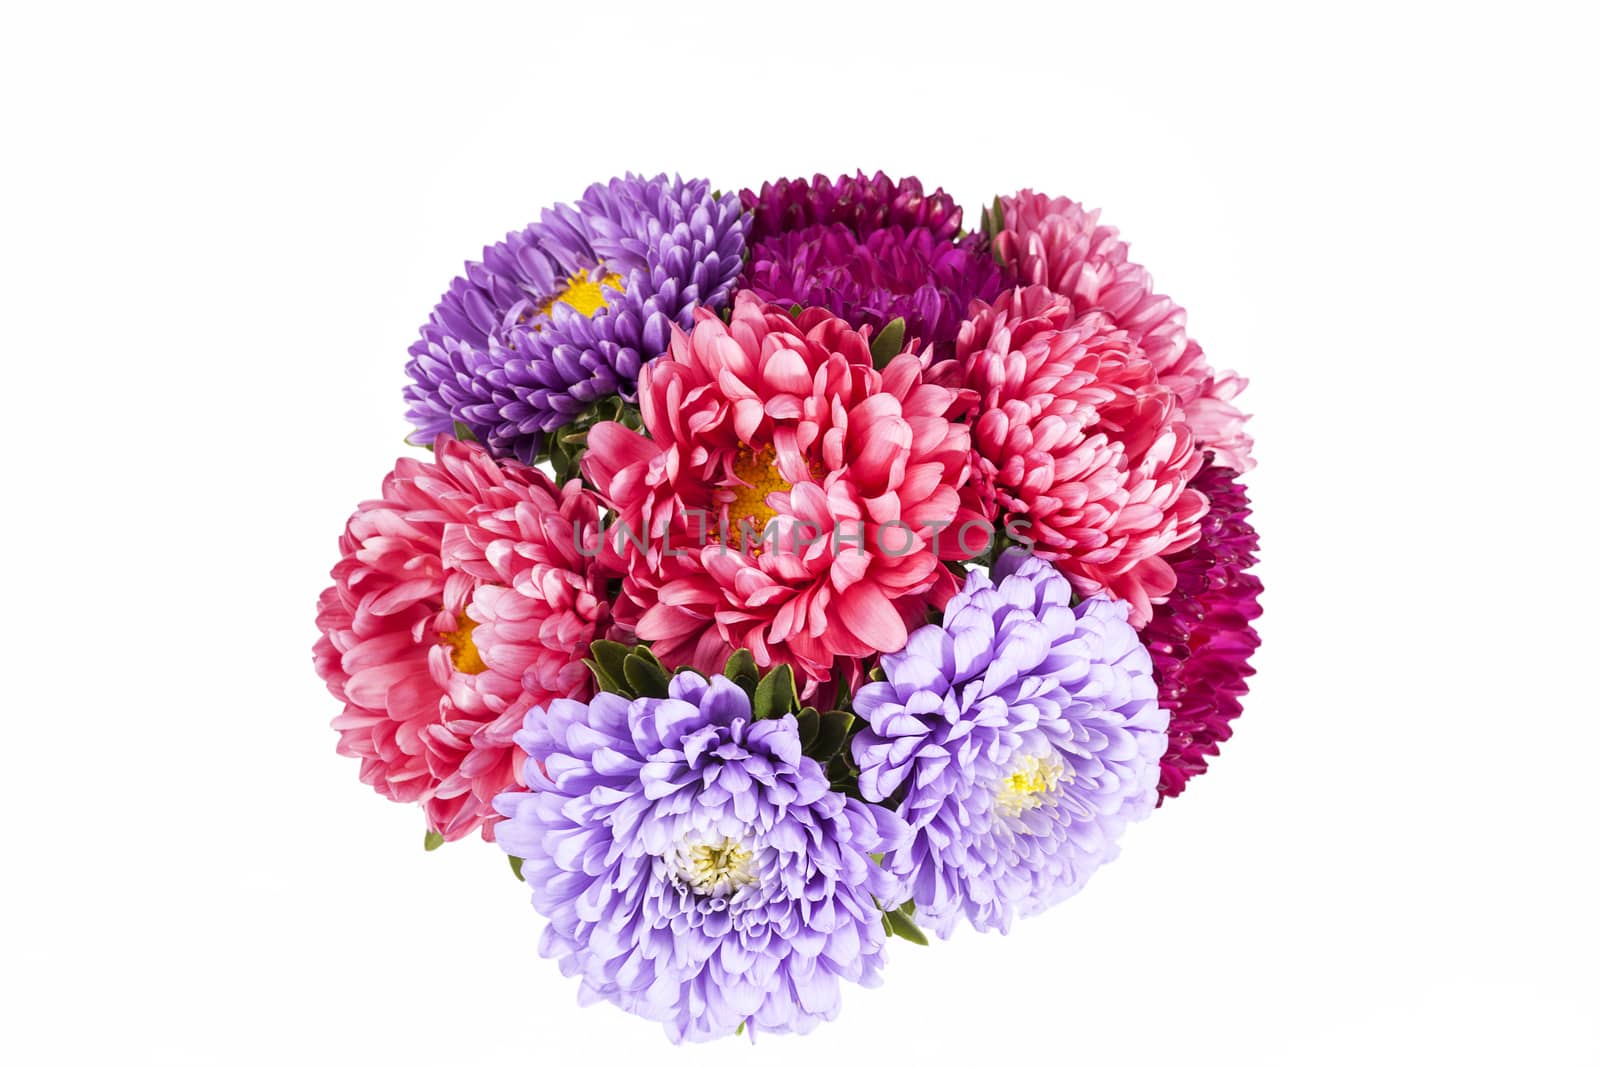 
Bouquet of aster flowers isolated on white background .
